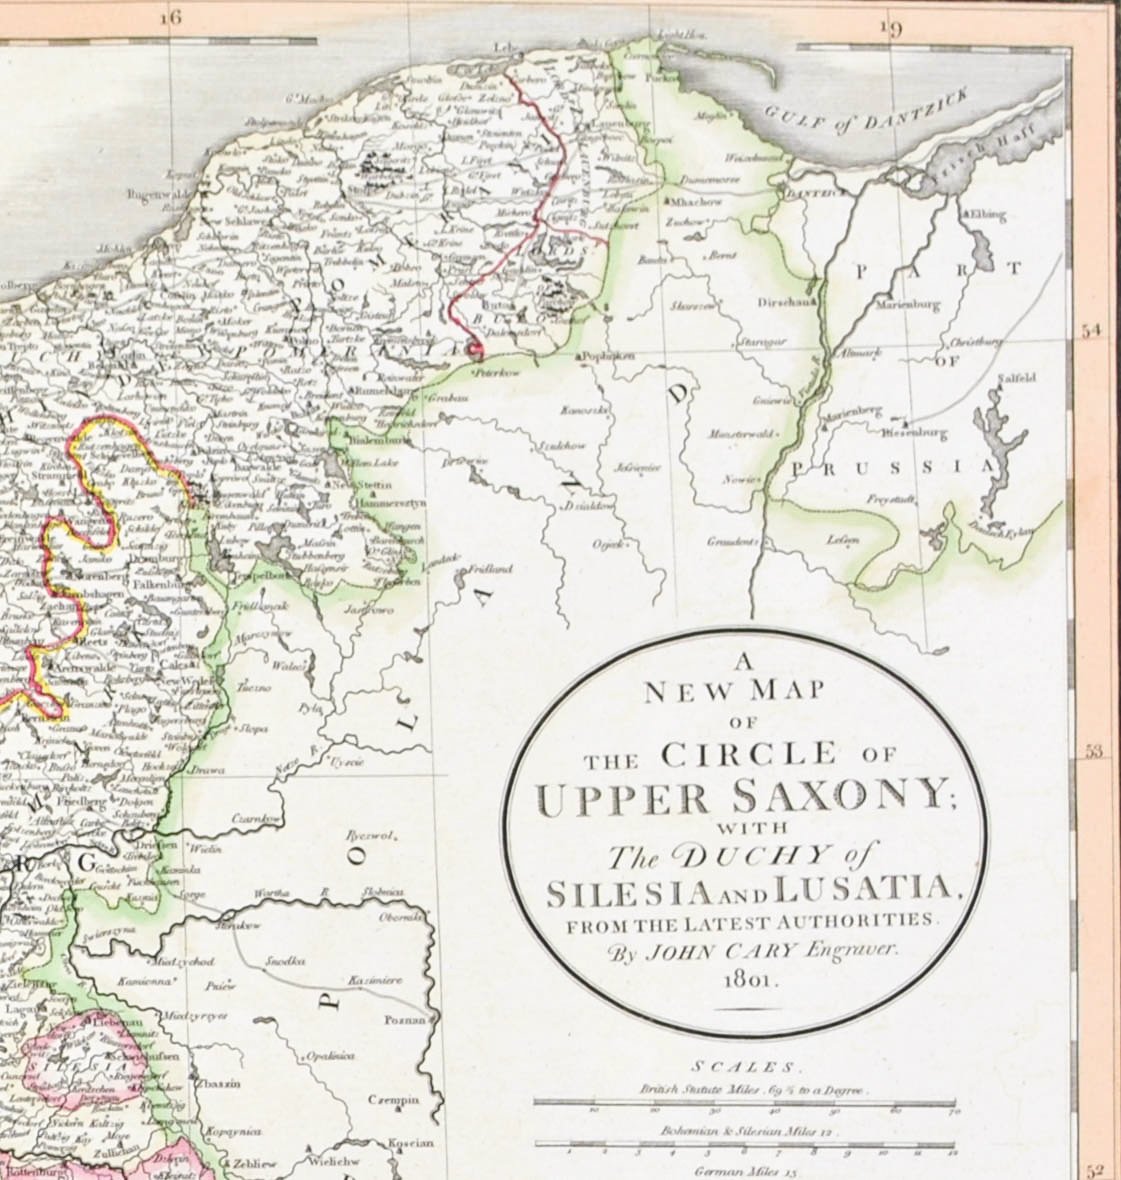 1808 A New Map of the Circle of Upper Saxony - Cary - Historic Accents